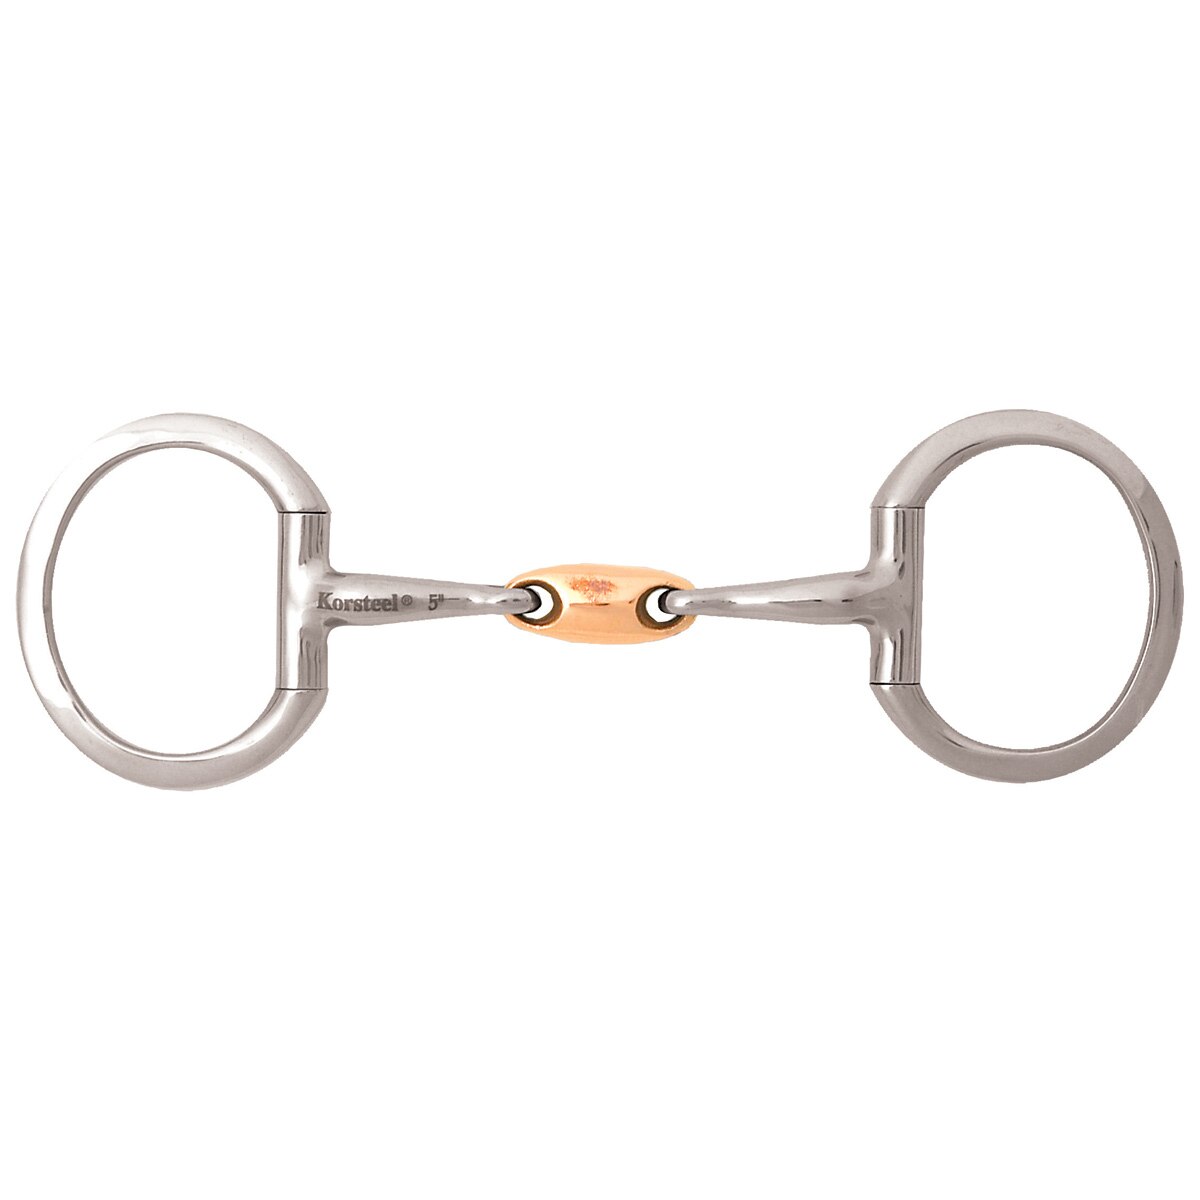 STAINLESS STEEL 4.75" STIRRUP AND EGGBUTT SNAFFLE BIT SET 4.5" TO 5.75" 